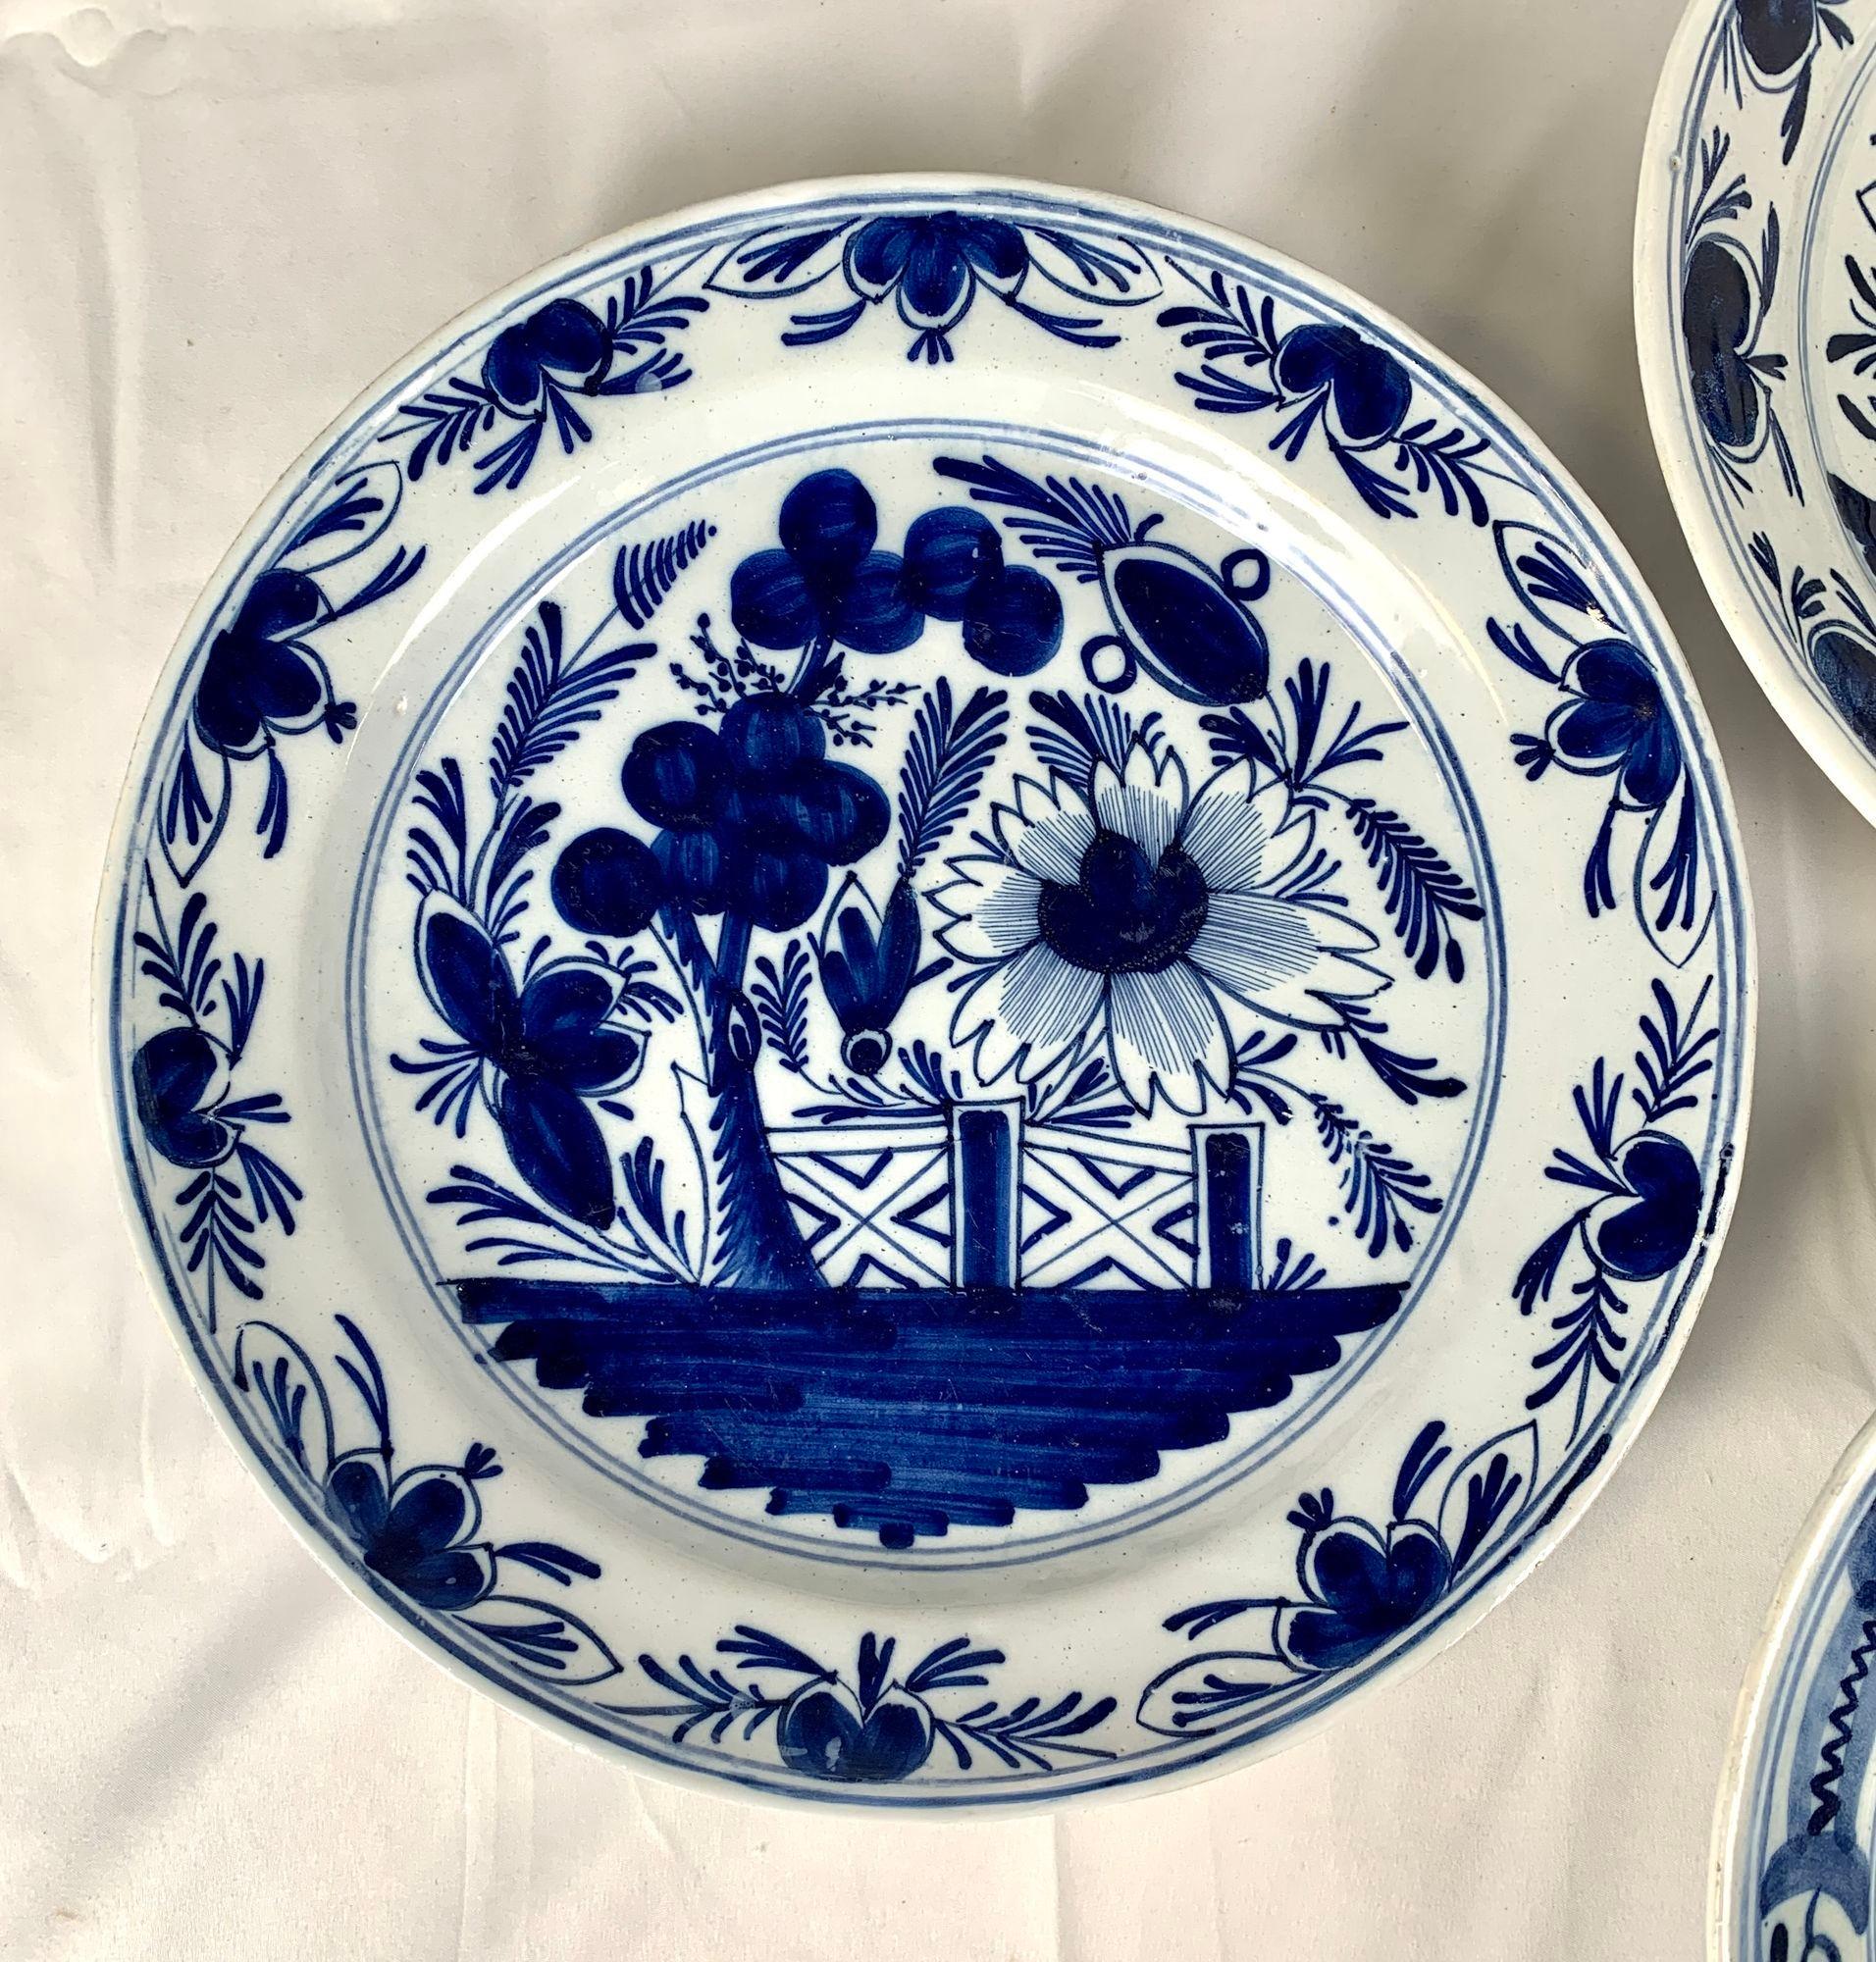 Made in The Netherlands circa 1800, this set of four similar blue and white chargers shows a traditional garden scene.
In the center, the chargers show a single large flower, blue rockwork, and a profusion of leaves on a white ground.
Each of the